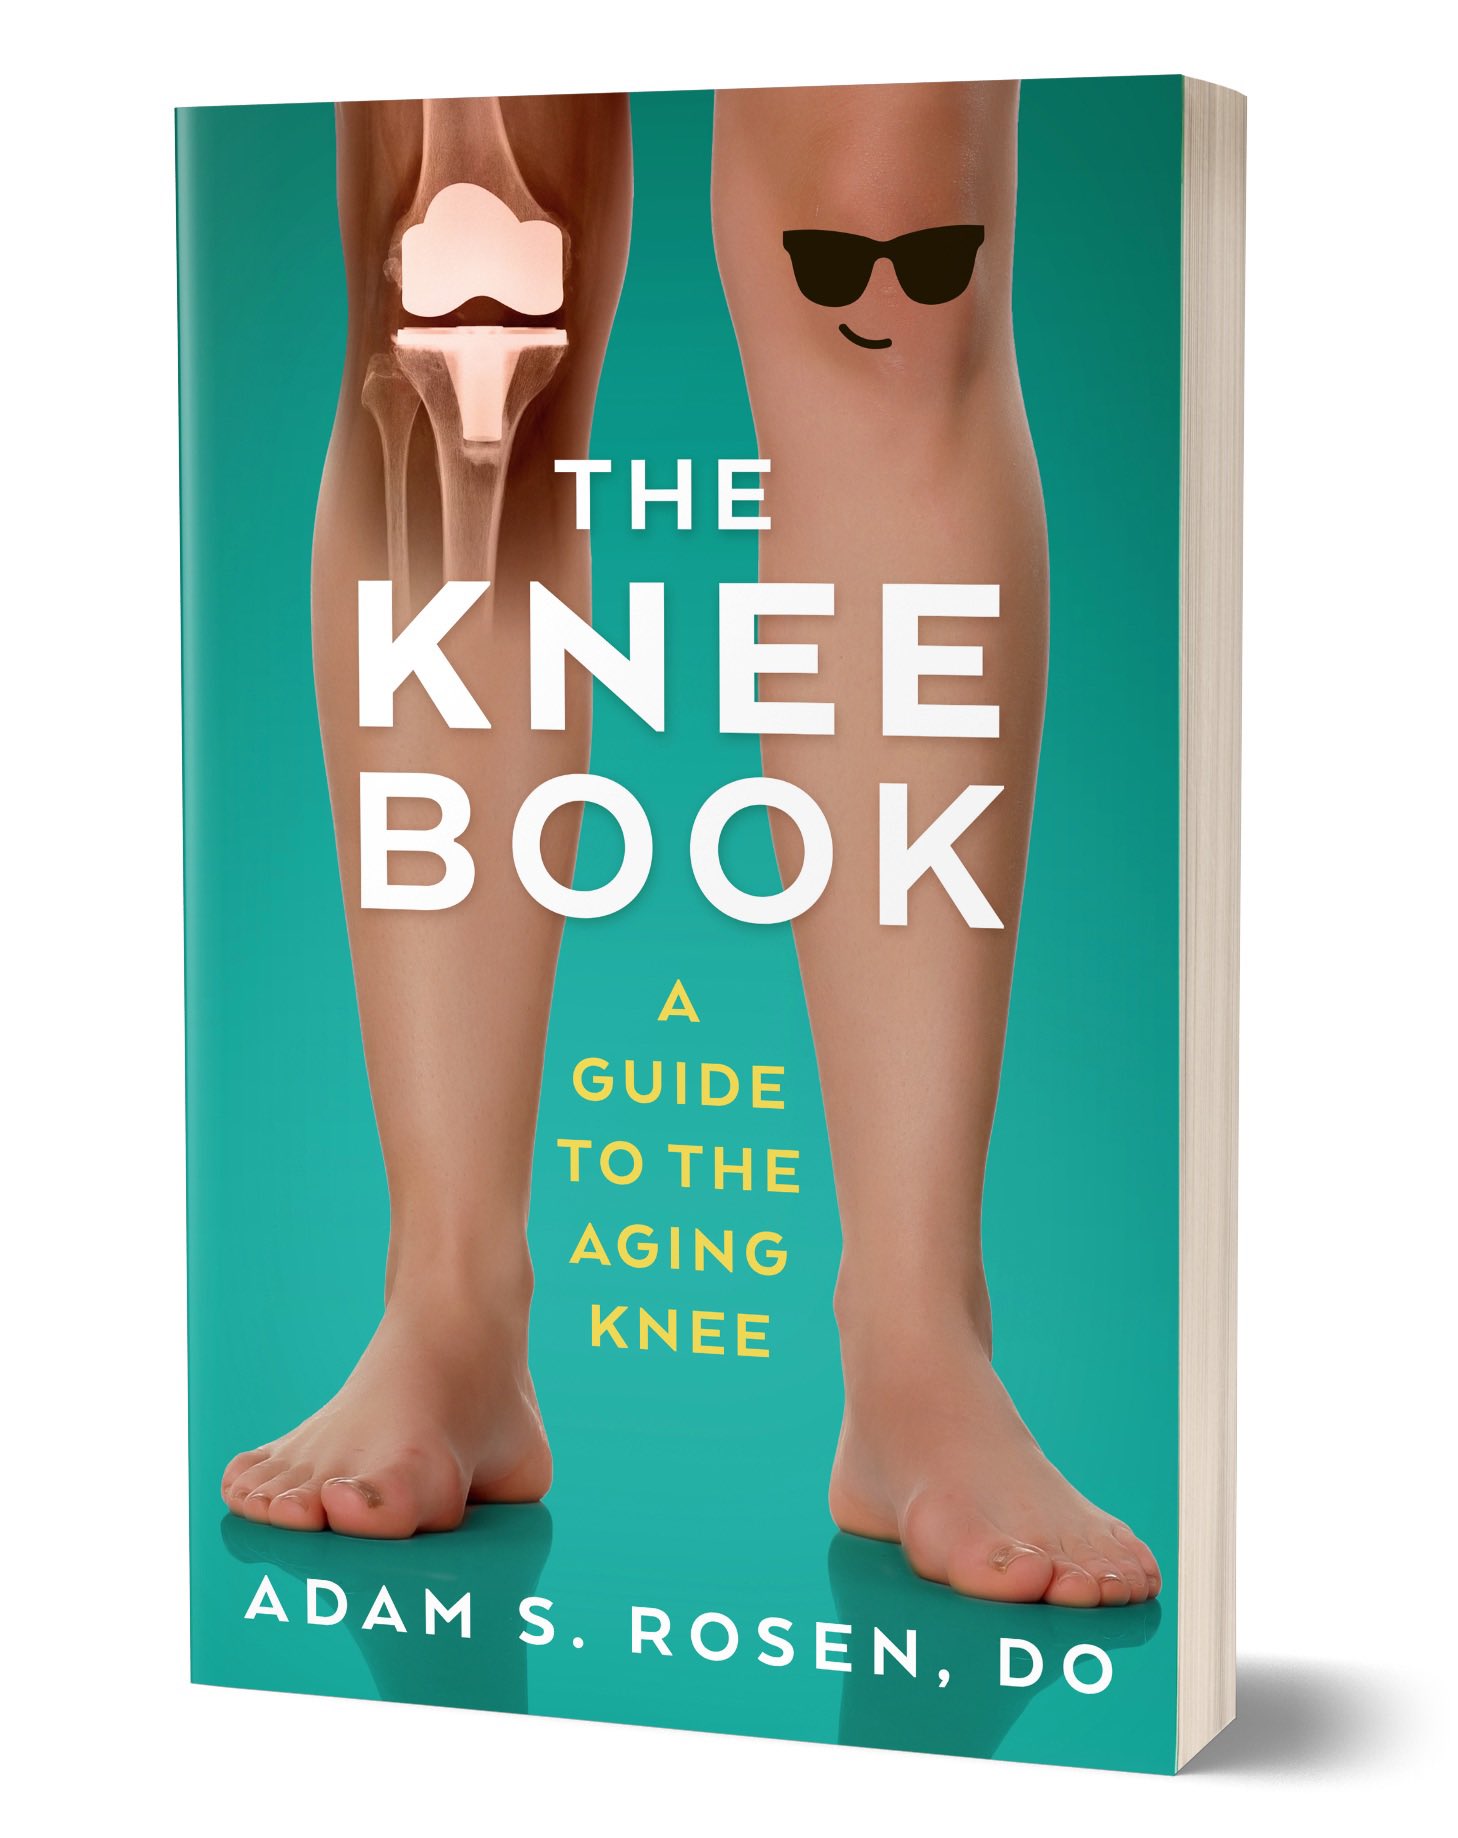 Tips From Author of The Knee Book: A Guide to the Aging Knee (Part 2/2)